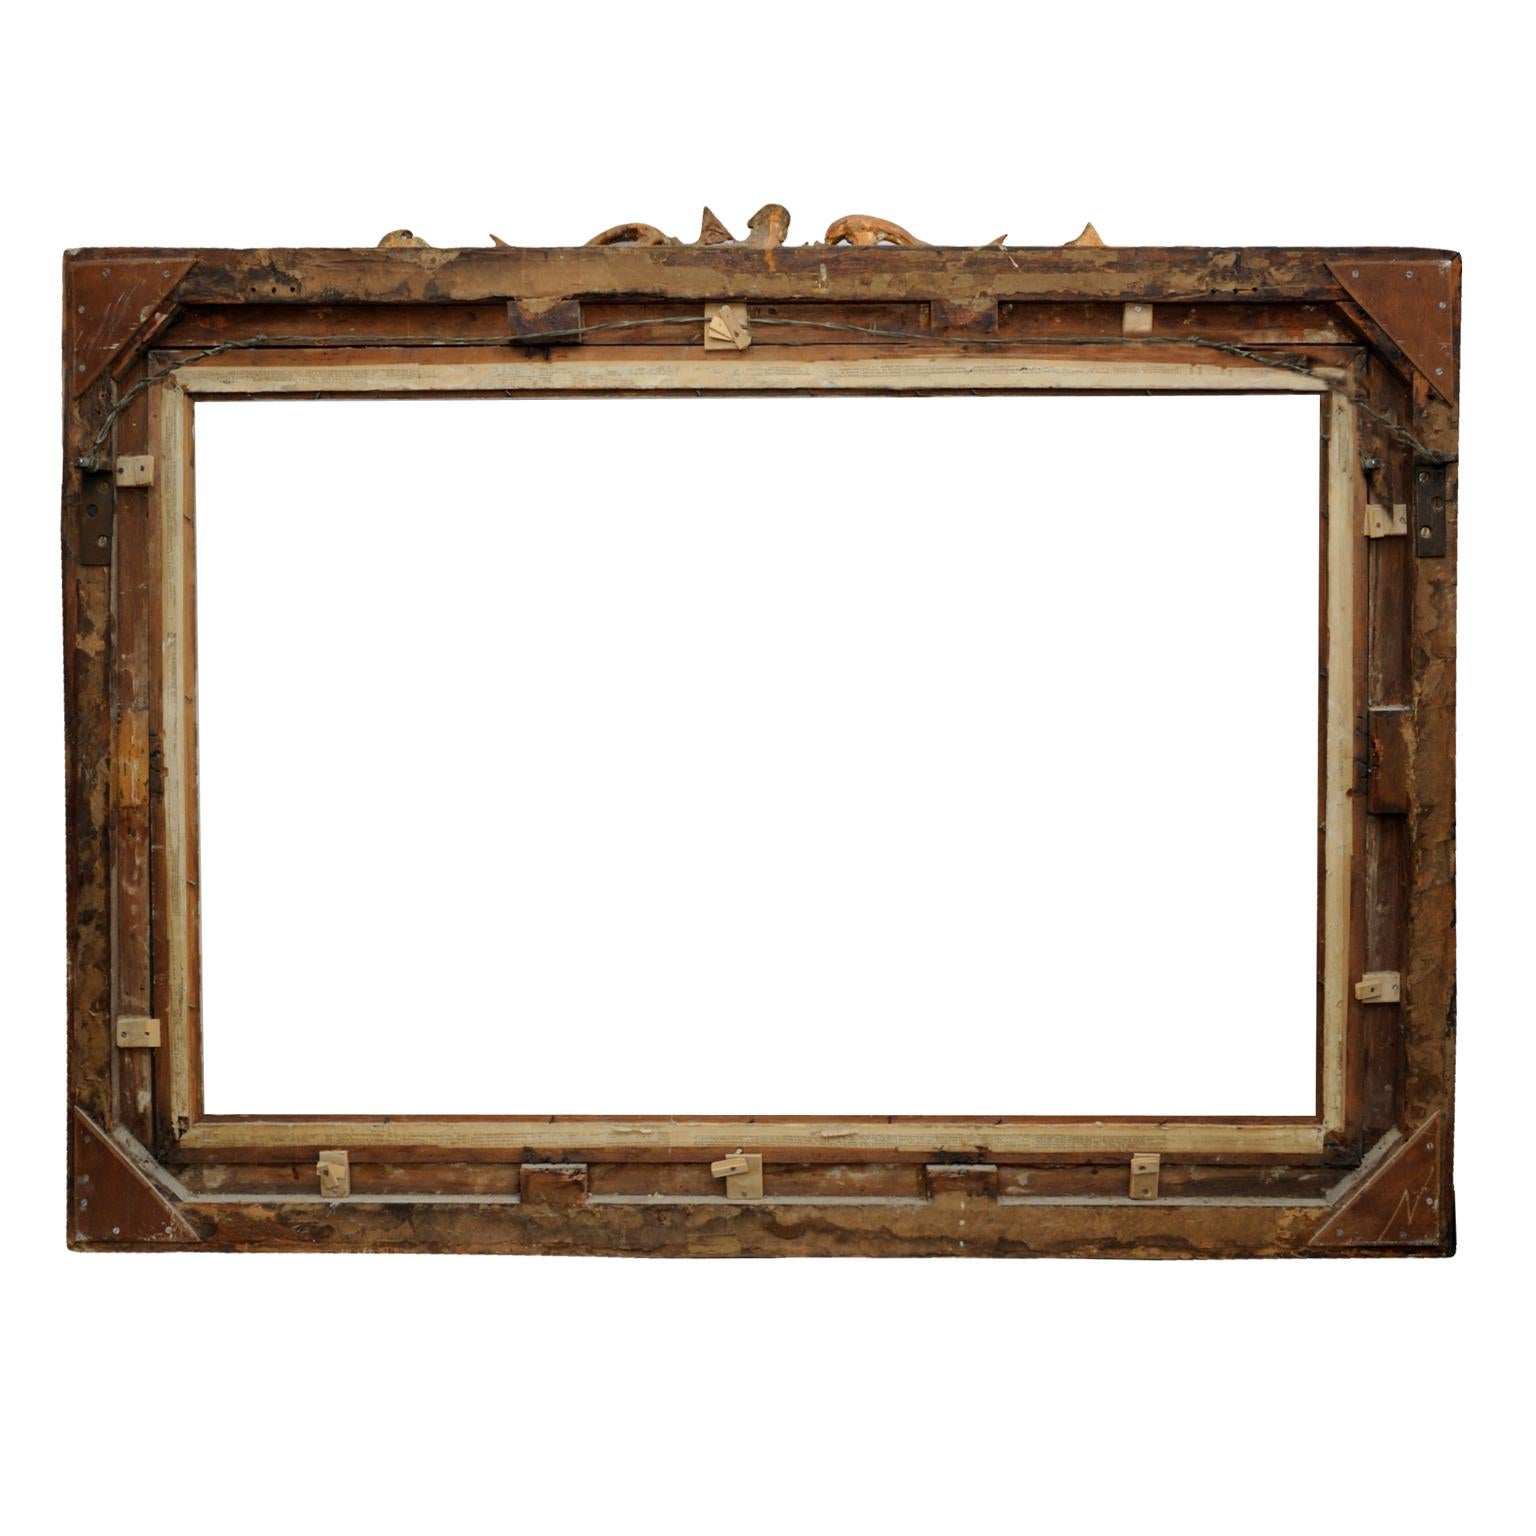 Large English George IV Carved Wood and Gilded Waterloo Frame, circa 1825 For Sale 4